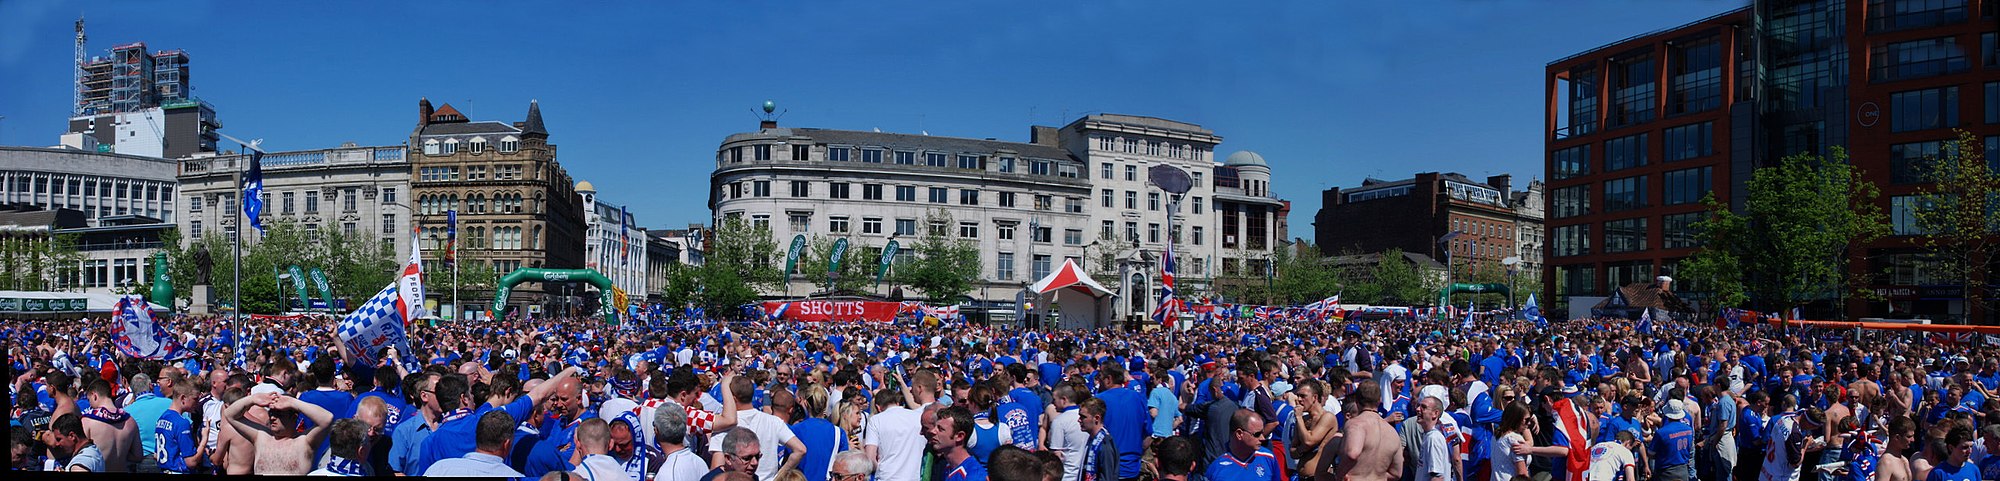 A panorama of Rangers supporters at the 2008 UEFA Cup final, in the Piccadilly Gardens fan zone. This picture was taken during the day before the match against Zenit Saint Petersburg on 14 May 2008.